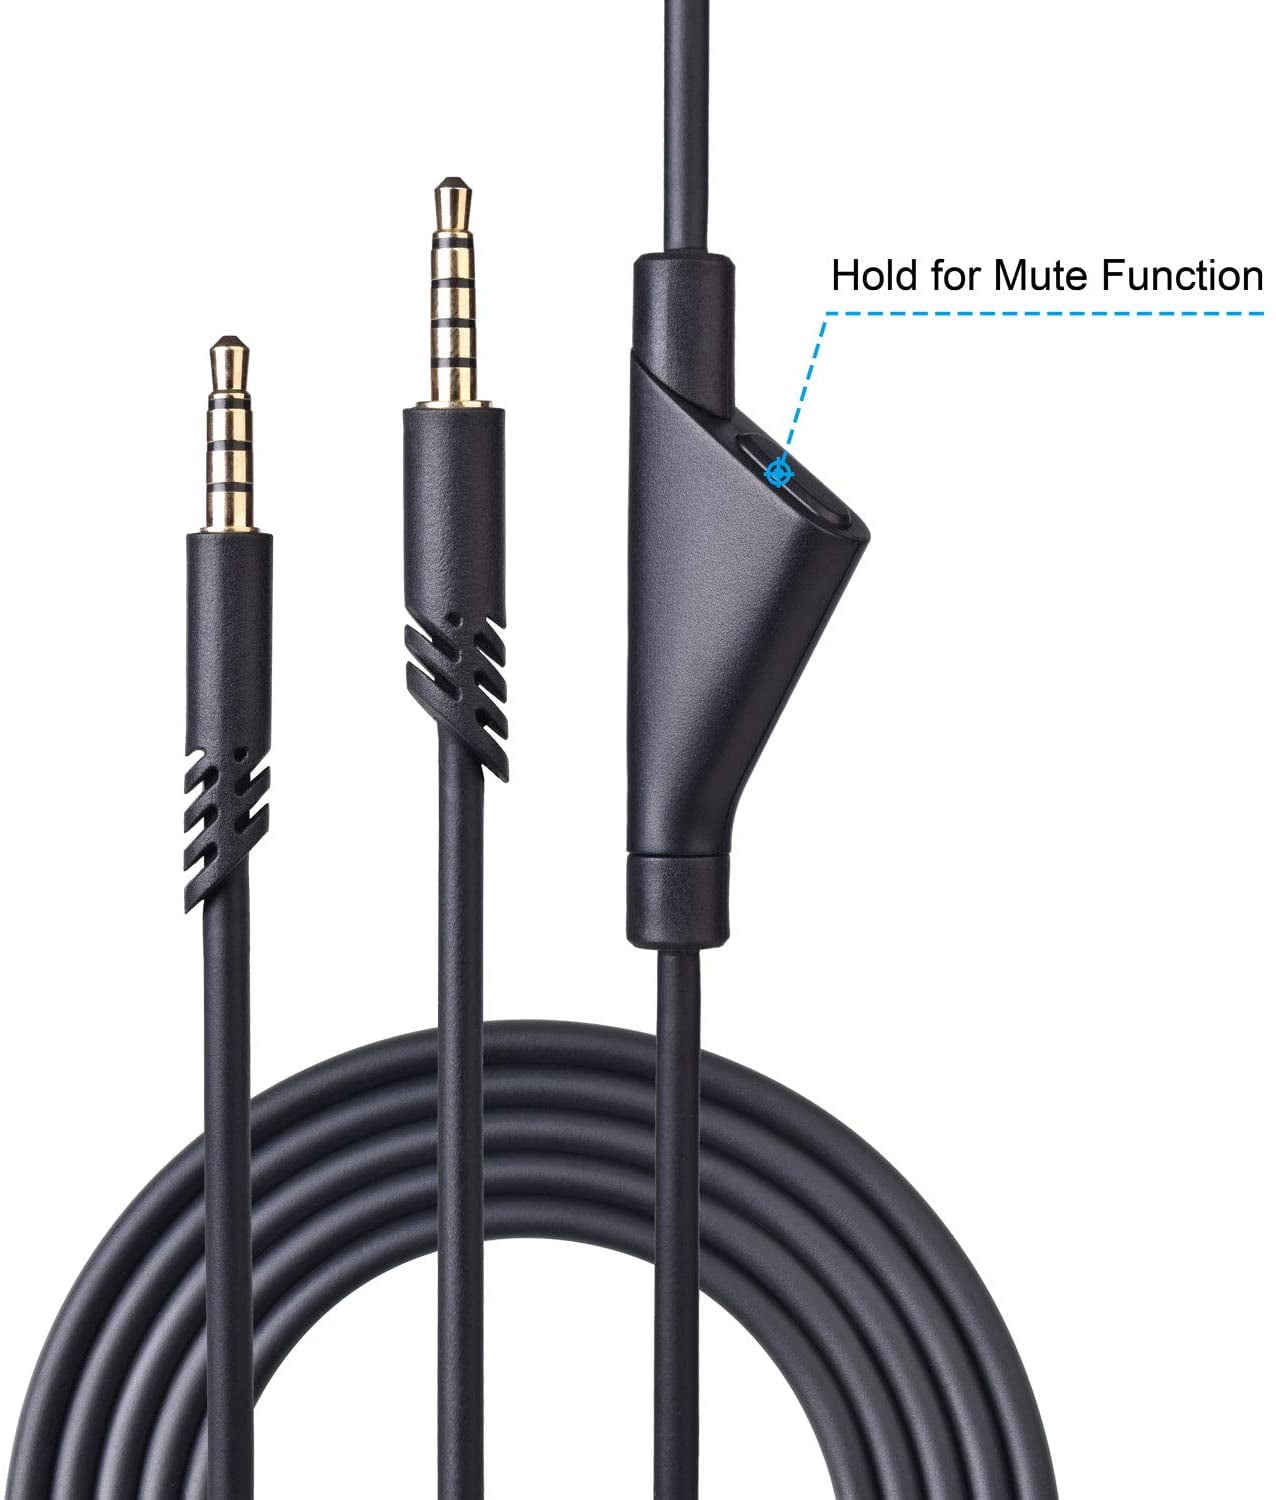 Replacement Astro 2.0M A10 Cable Cord with Mute Function Also Works ...